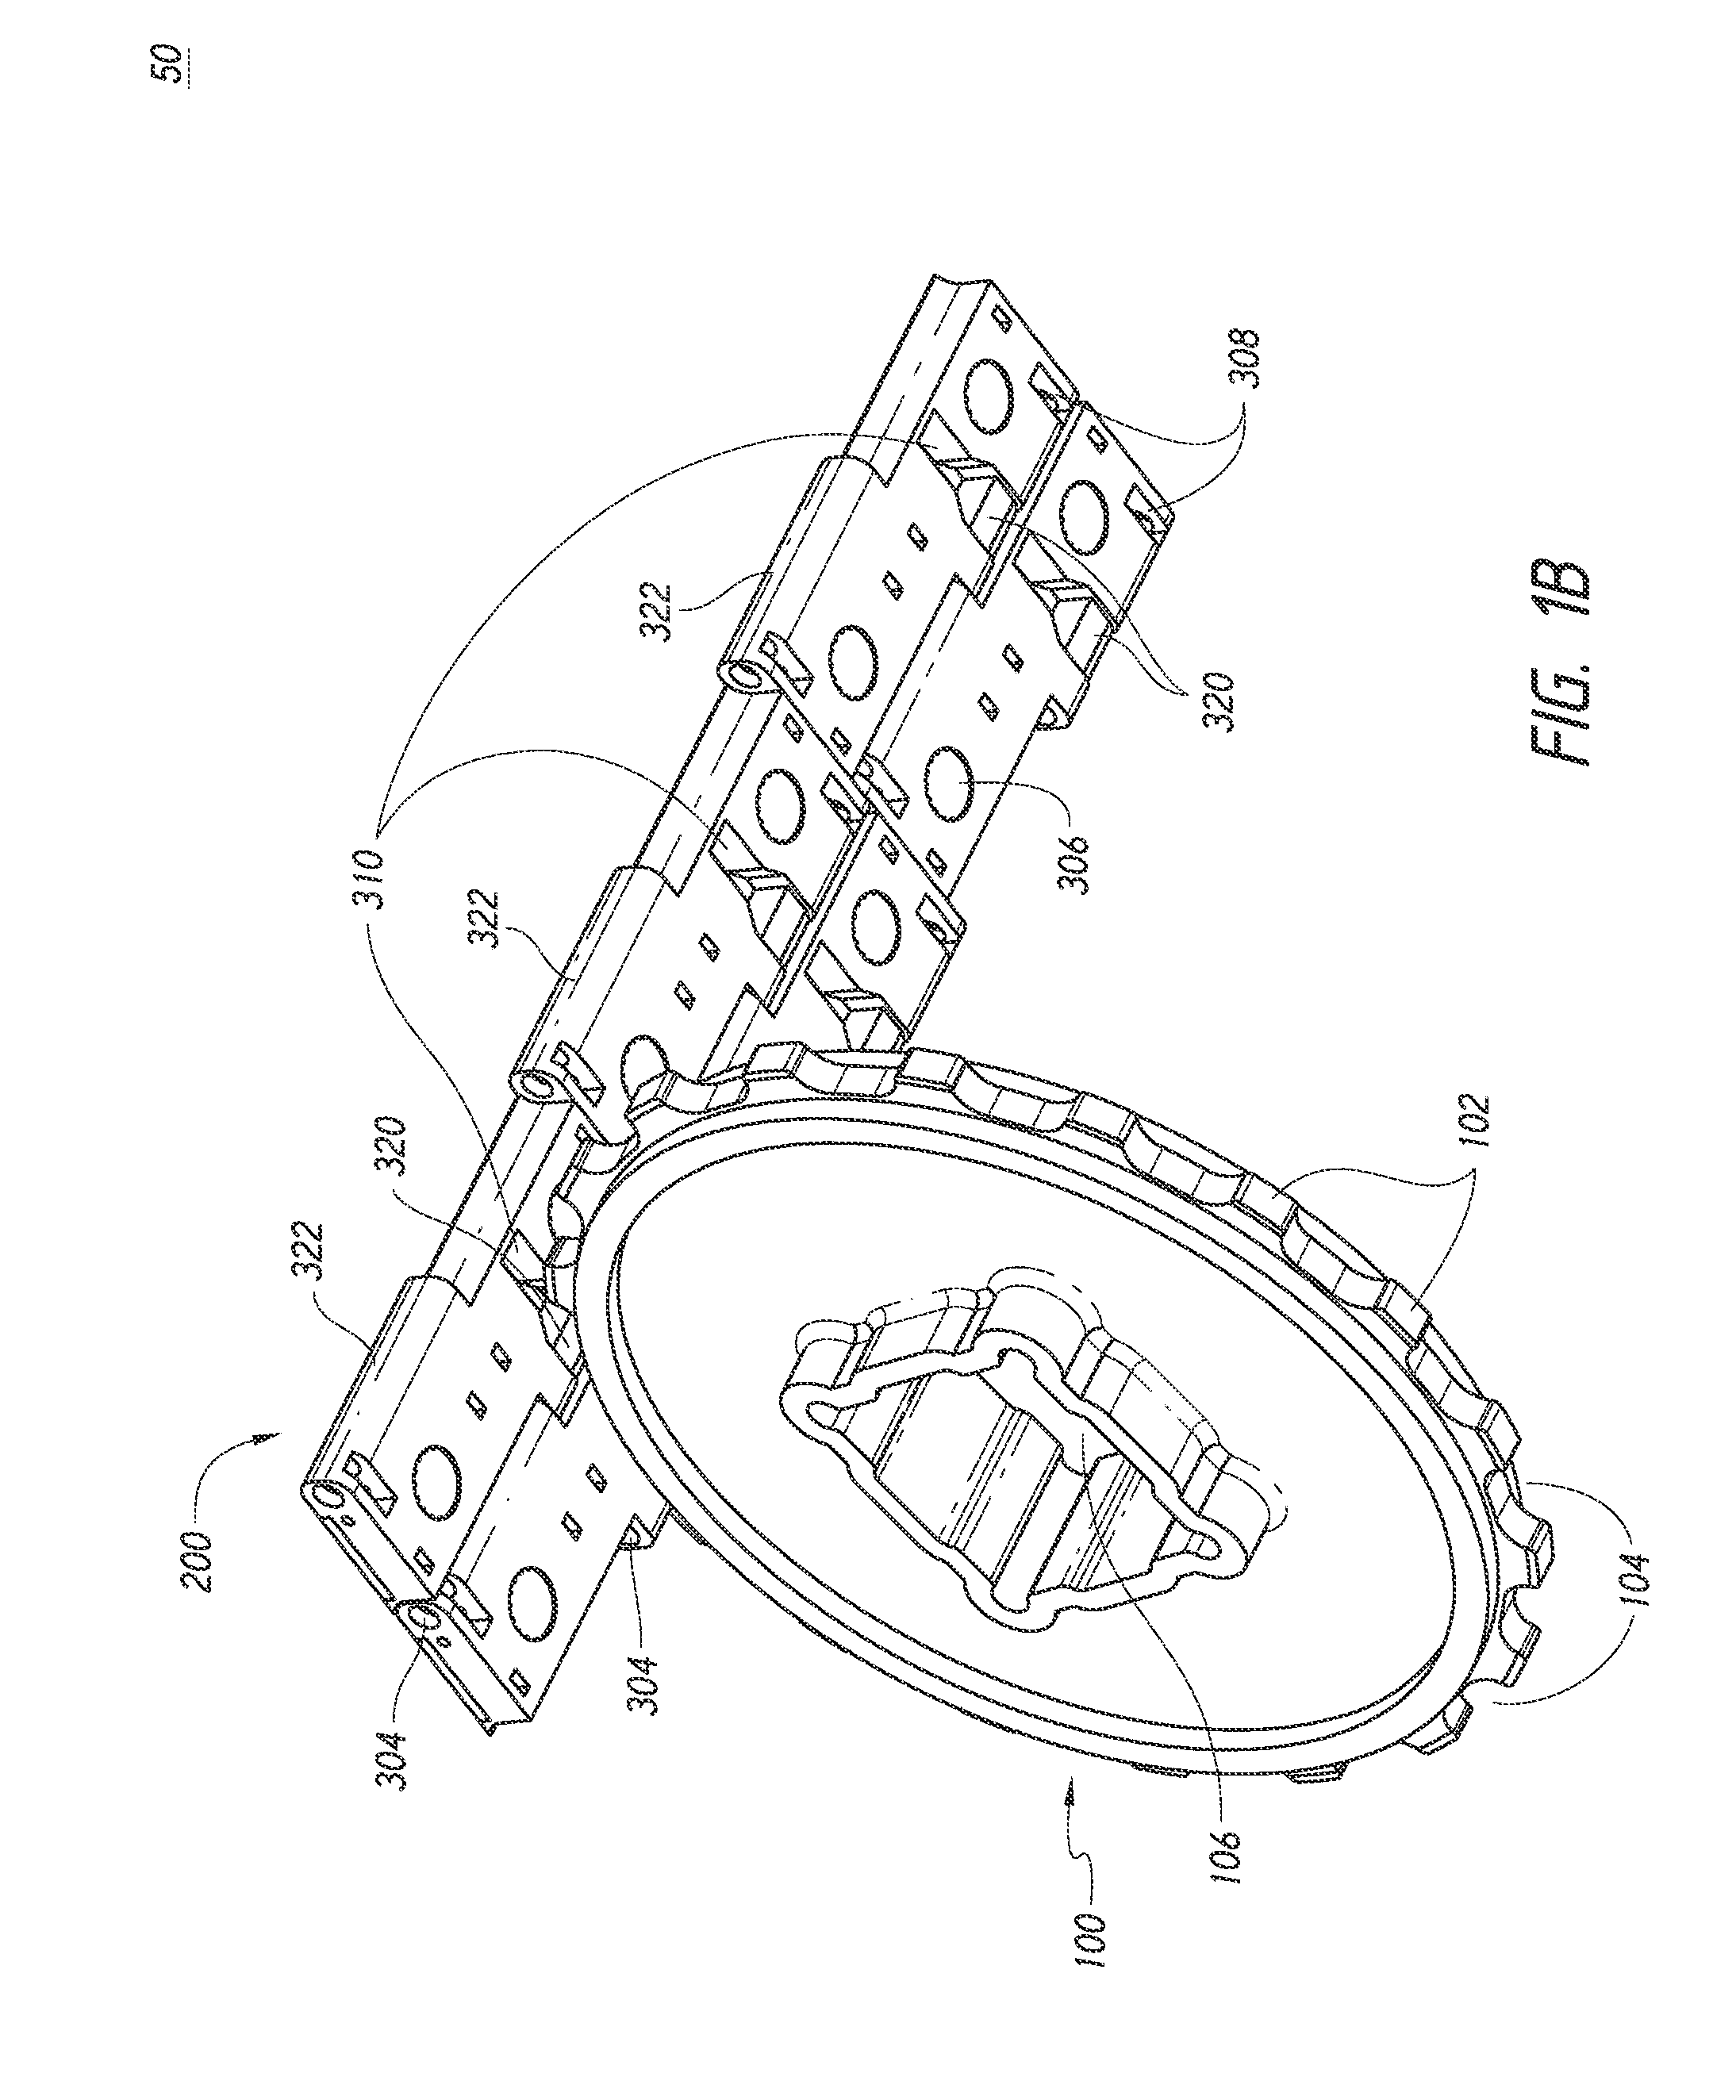 Modular conveying systems and methods